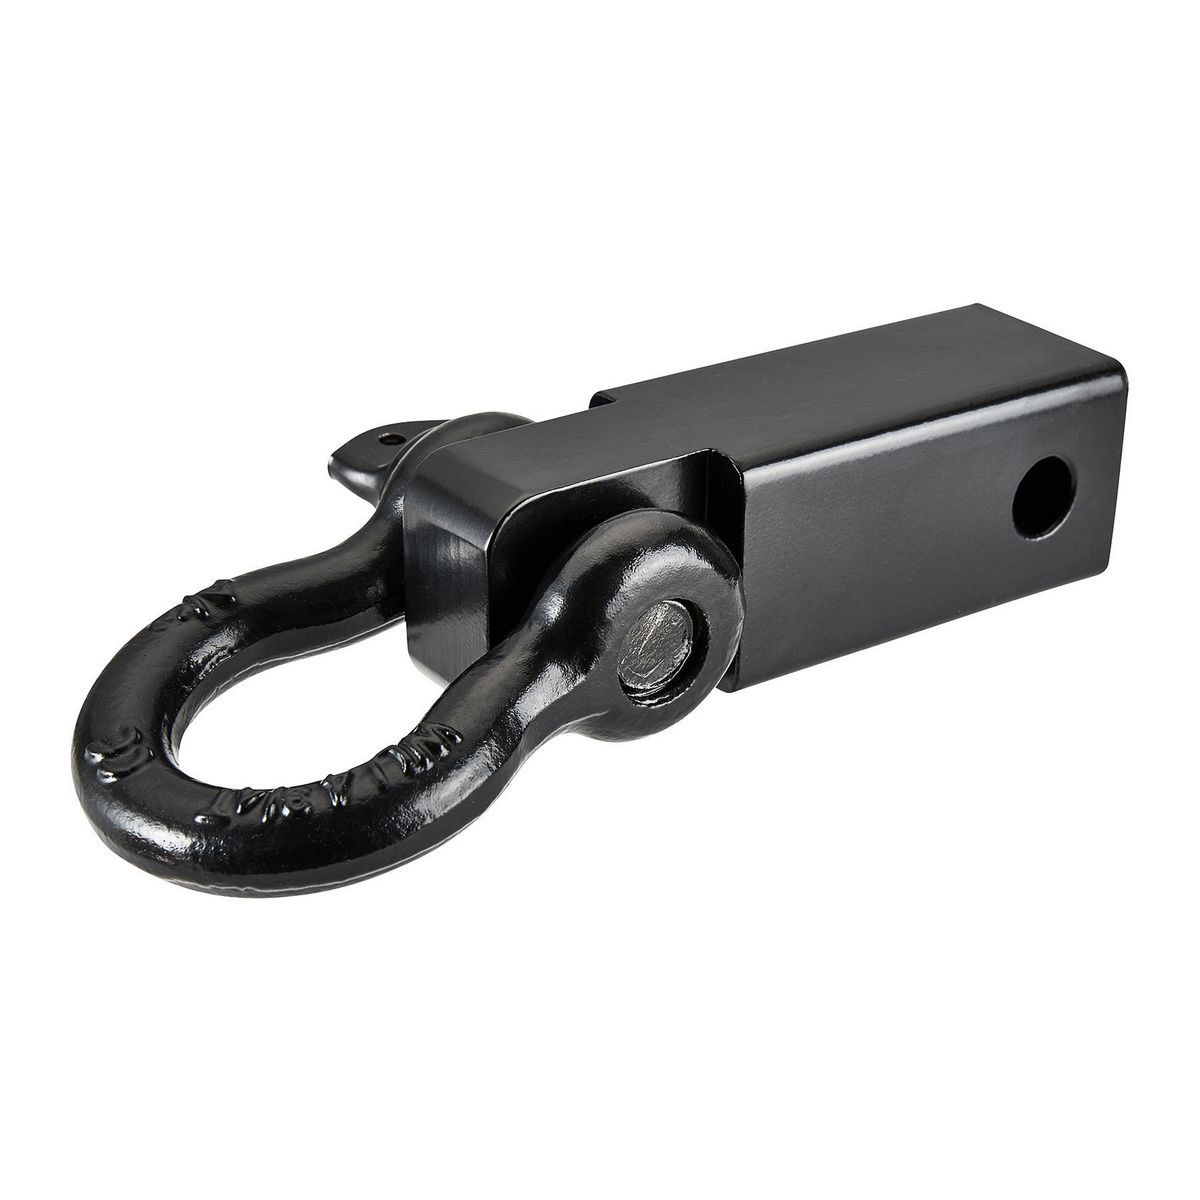 HAUL-MASTER 2 in. Hitch Mounted D-Ring Shackle